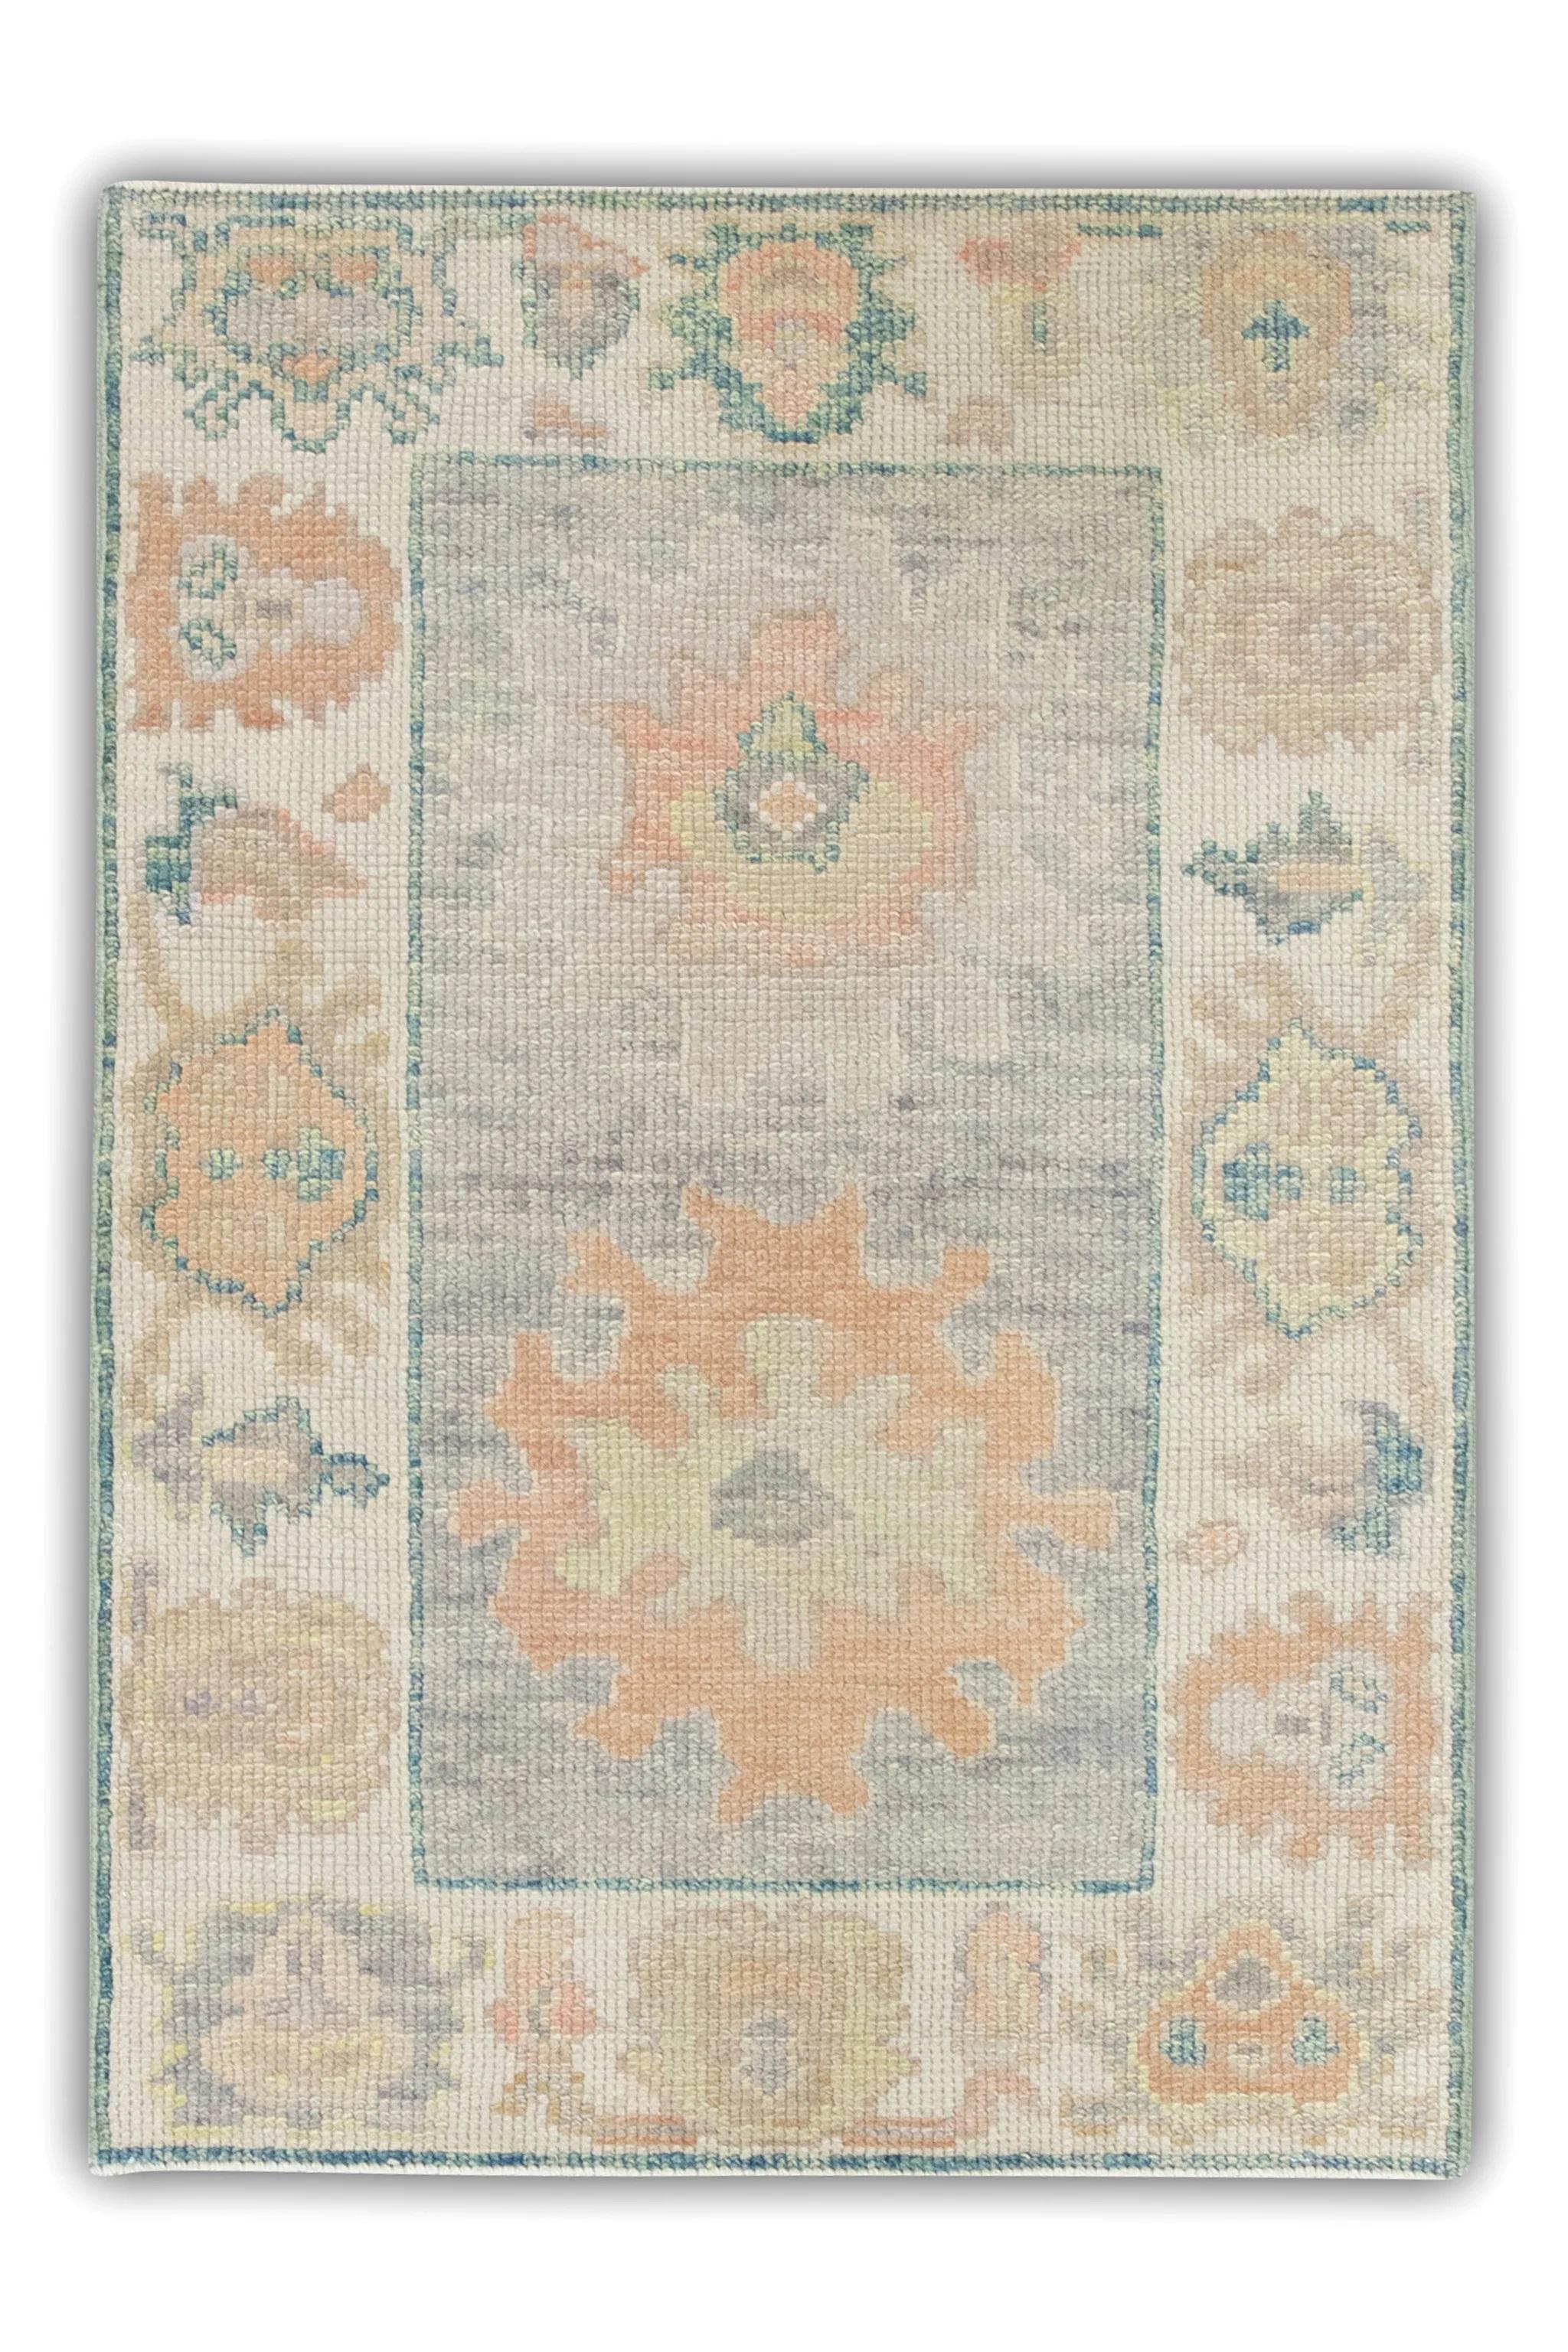 Contemporary Orange and Green Floral Design Handwoven Wool Turkish Oushak Rug 2'1